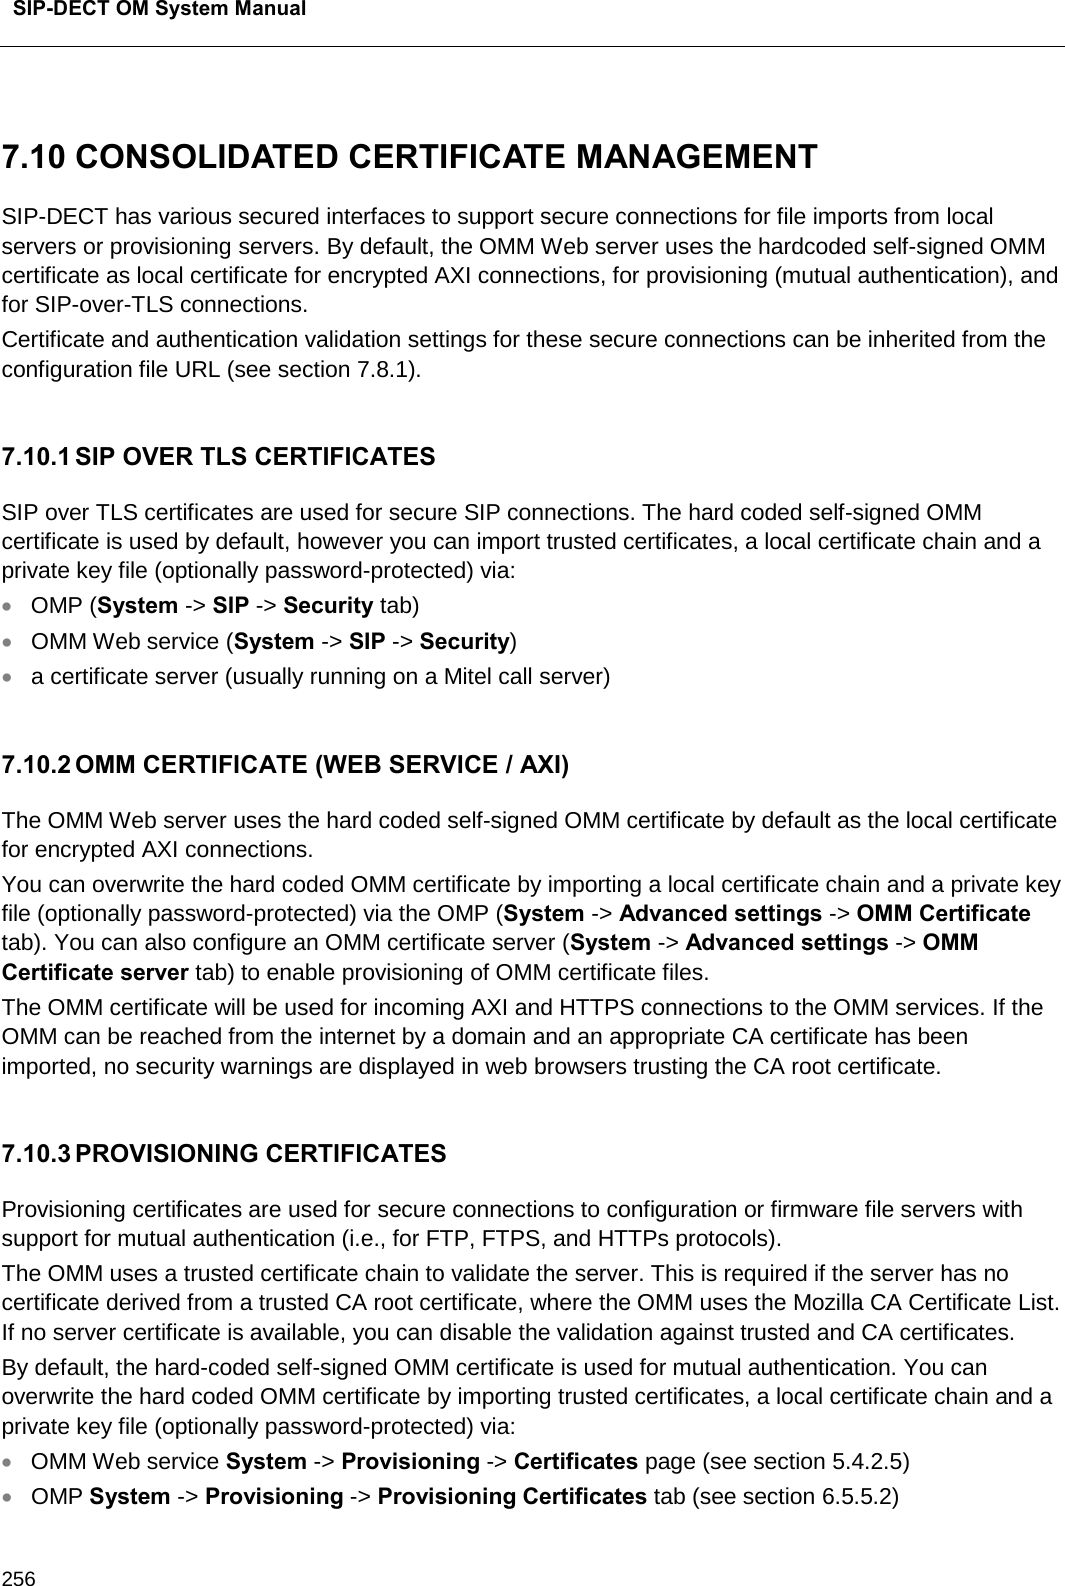  SIP-DECT OM System Manual    256  7.10 CONSOLIDATED CERTIFICATE MANAGEMENT  SIP-DECT has various secured interfaces to support secure connections for file imports from local servers or provisioning servers. By default, the OMM Web server uses the hardcoded self-signed OMM certificate as local certificate for encrypted AXI connections, for provisioning (mutual authentication), and for SIP-over-TLS connections. Certificate and authentication validation settings for these secure connections can be inherited from the configuration file URL (see section 7.8.1).   7.10.1 SIP OVER TLS CERTIFICATES SIP over TLS certificates are used for secure SIP connections. The hard coded self-signed OMM certificate is used by default, however you can import trusted certificates, a local certificate chain and a private key file (optionally password-protected) via: • OMP (System -&gt; SIP -&gt; Security tab)  • OMM Web service (System -&gt; SIP -&gt; Security) • a certificate server (usually running on a Mitel call server)  7.10.2 OMM CERTIFICATE (WEB SERVICE / AXI) The OMM Web server uses the hard coded self-signed OMM certificate by default as the local certificate for encrypted AXI connections. You can overwrite the hard coded OMM certificate by importing a local certificate chain and a private key file (optionally password-protected) via the OMP (System -&gt; Advanced settings -&gt; OMM Certificate tab). You can also configure an OMM certificate server (System -&gt; Advanced settings -&gt; OMM Certificate server tab) to enable provisioning of OMM certificate files. The OMM certificate will be used for incoming AXI and HTTPS connections to the OMM services. If the OMM can be reached from the internet by a domain and an appropriate CA certificate has been imported, no security warnings are displayed in web browsers trusting the CA root certificate.   7.10.3 PROVISIONING CERTIFICATES Provisioning certificates are used for secure connections to configuration or firmware file servers with support for mutual authentication (i.e., for FTP, FTPS, and HTTPs protocols).  The OMM uses a trusted certificate chain to validate the server. This is required if the server has no certificate derived from a trusted CA root certificate, where the OMM uses the Mozilla CA Certificate List. If no server certificate is available, you can disable the validation against trusted and CA certificates.     By default, the hard-coded self-signed OMM certificate is used for mutual authentication. You can overwrite the hard coded OMM certificate by importing trusted certificates, a local certificate chain and a private key file (optionally password-protected) via: • OMM Web service System -&gt; Provisioning -&gt; Certificates page (see section 5.4.2.5) • OMP System -&gt; Provisioning -&gt; Provisioning Certificates tab (see section 6.5.5.2)  